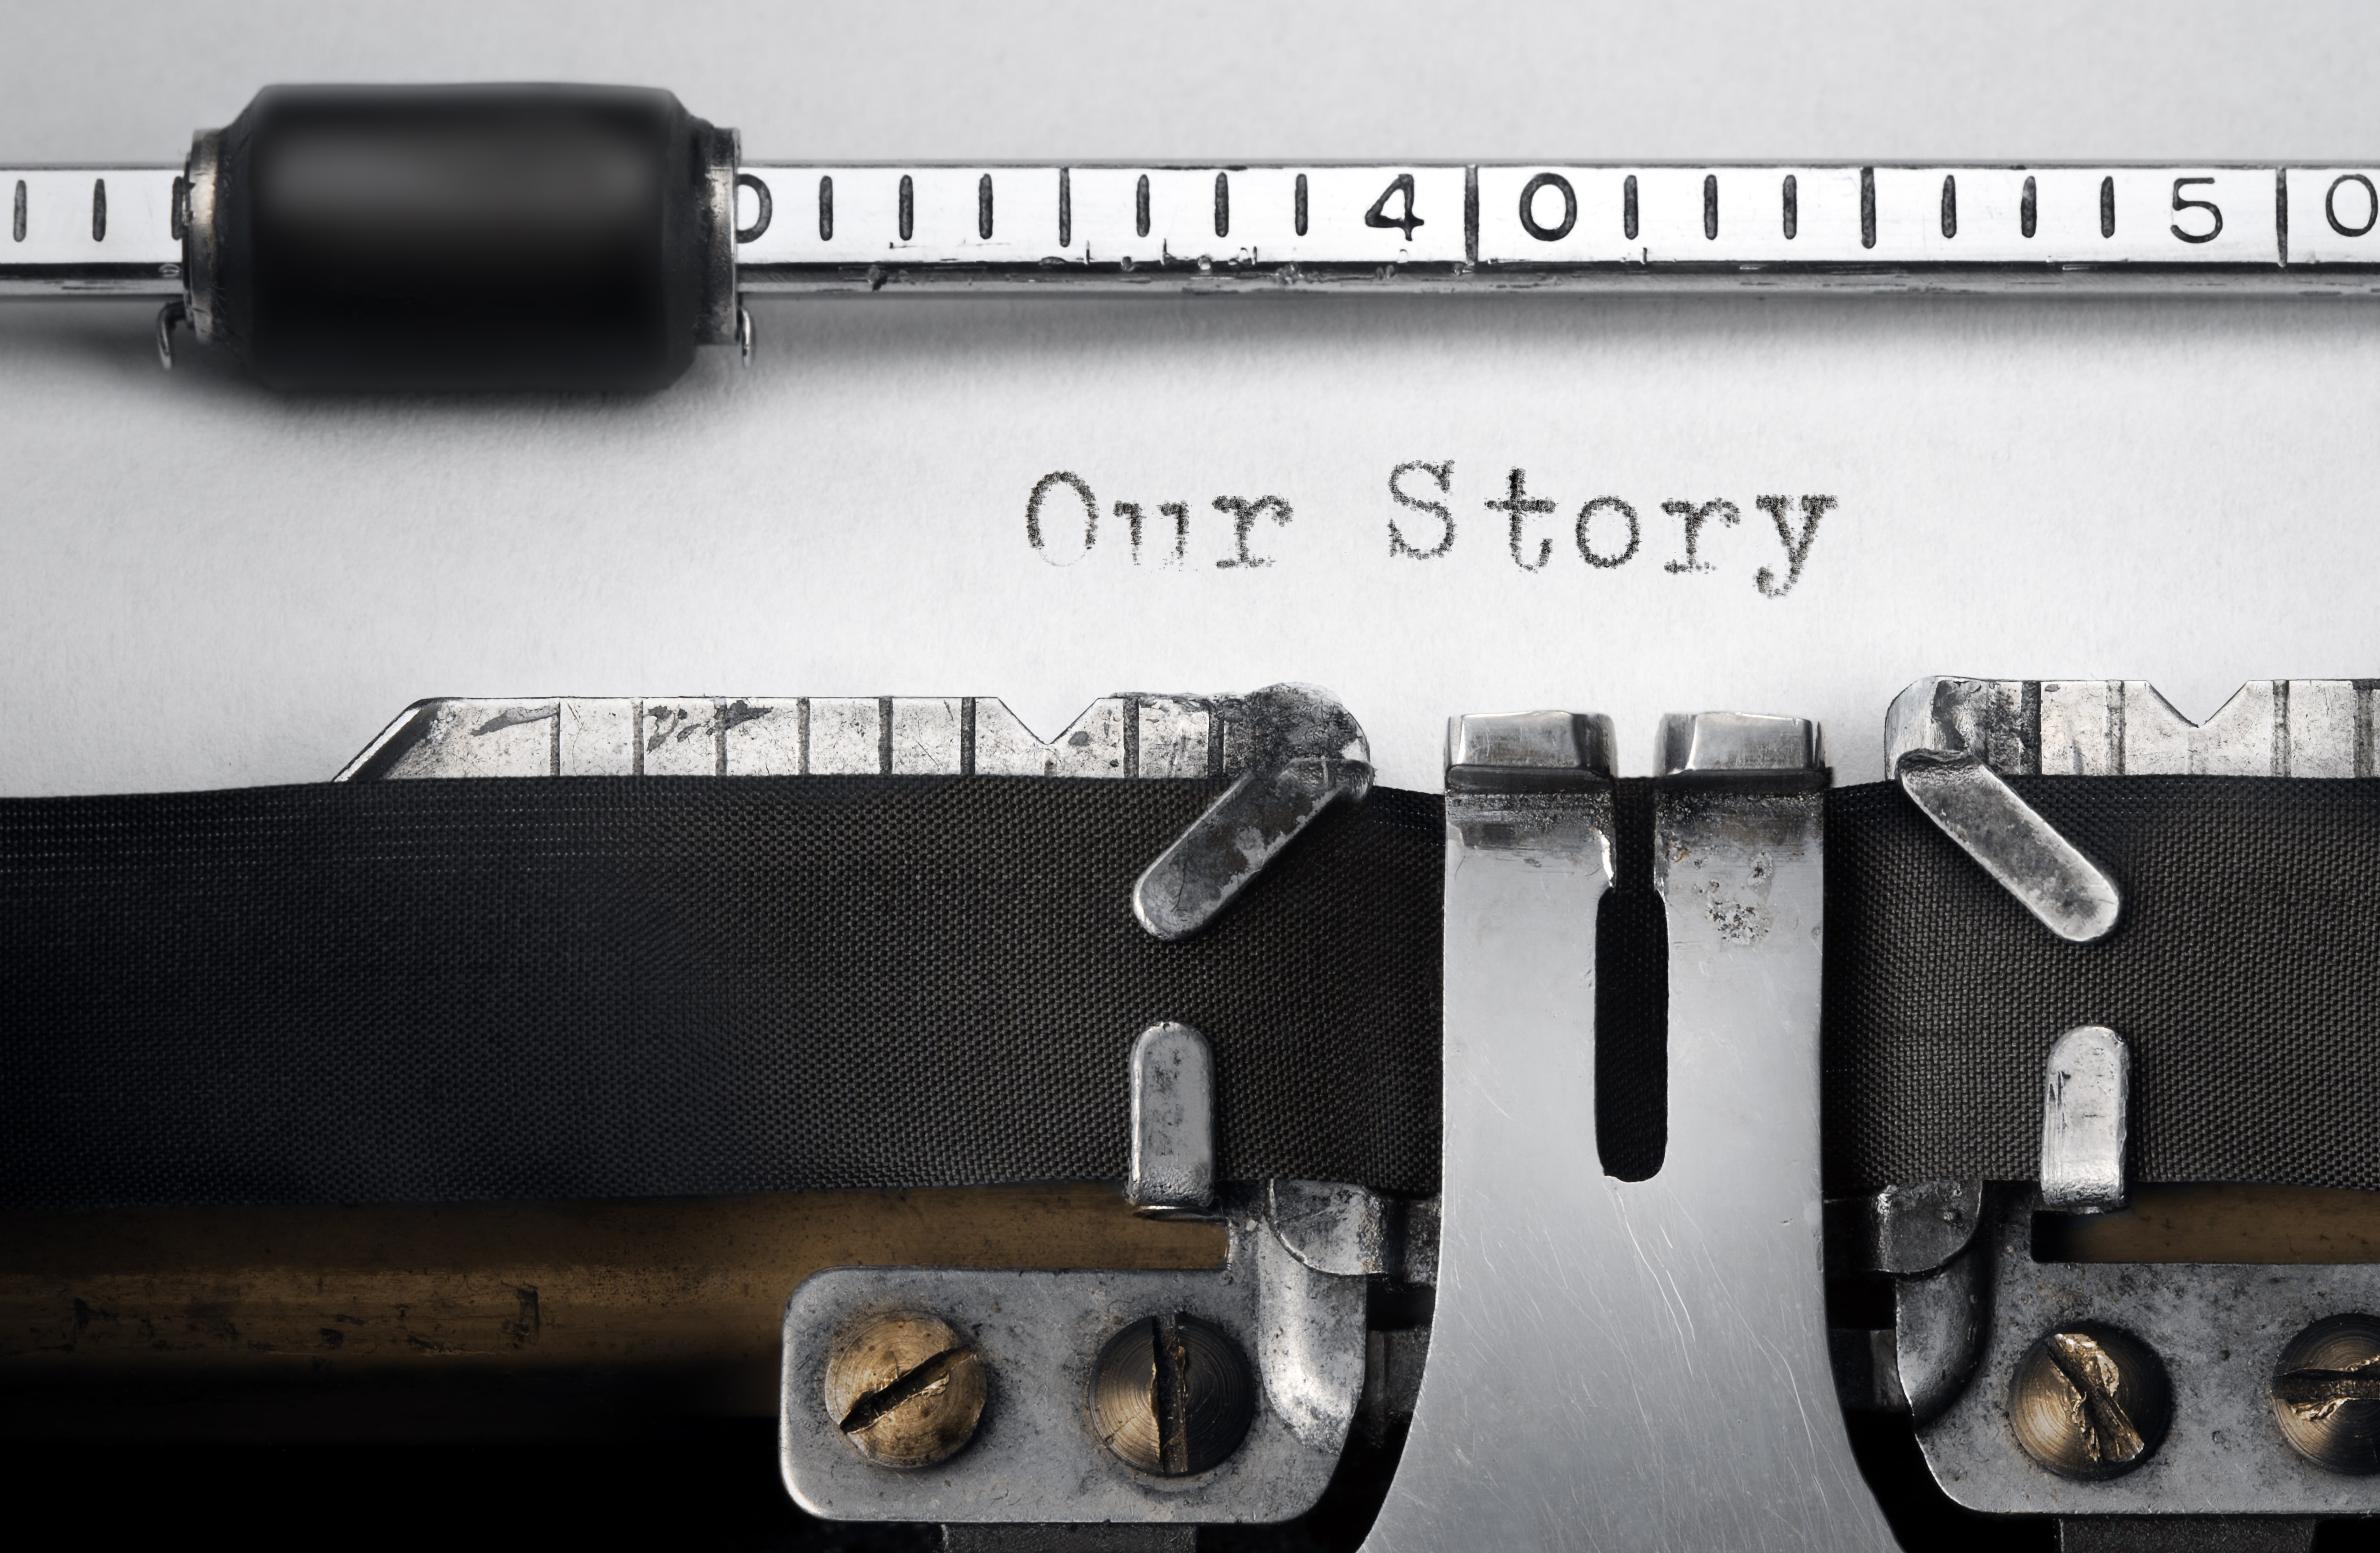 „Our Story“ written on an old typewriter